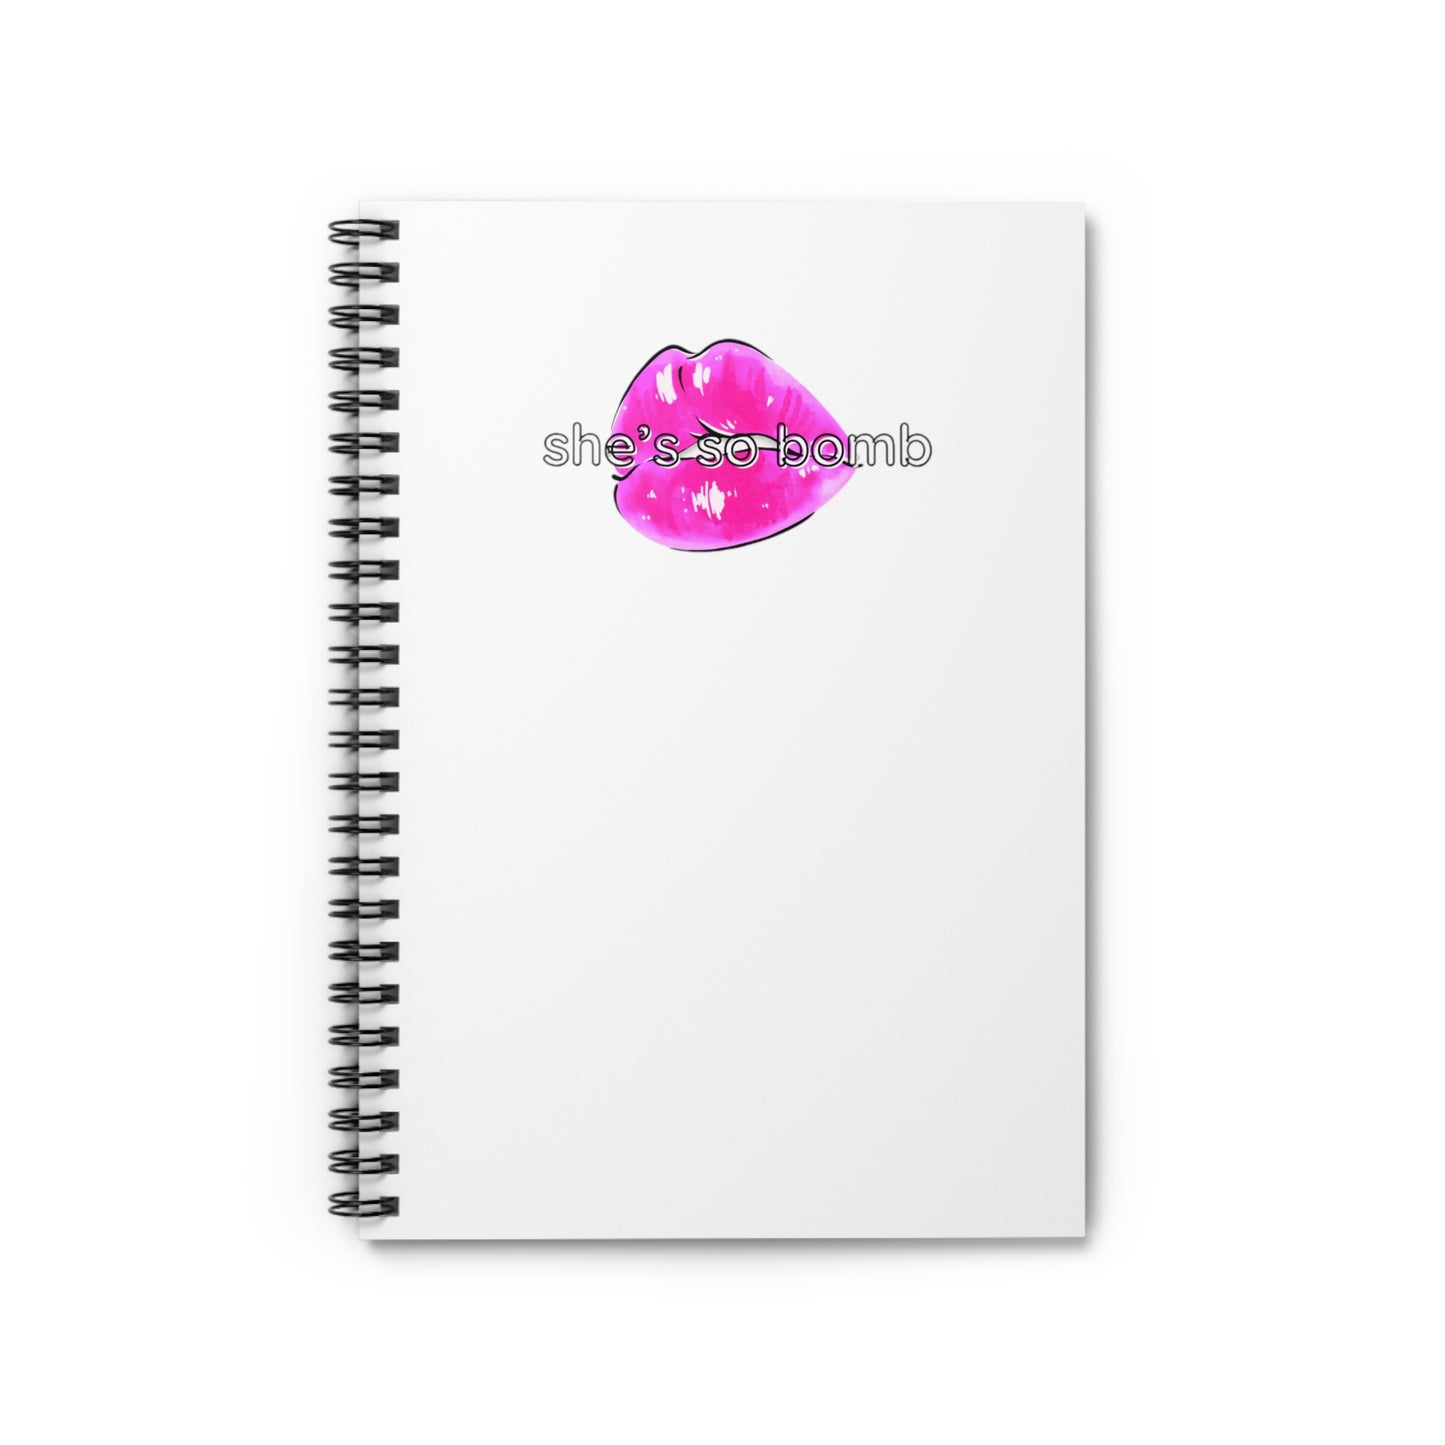 MAGENTA BOMB LIPS Spiral Notebook - Ruled Line